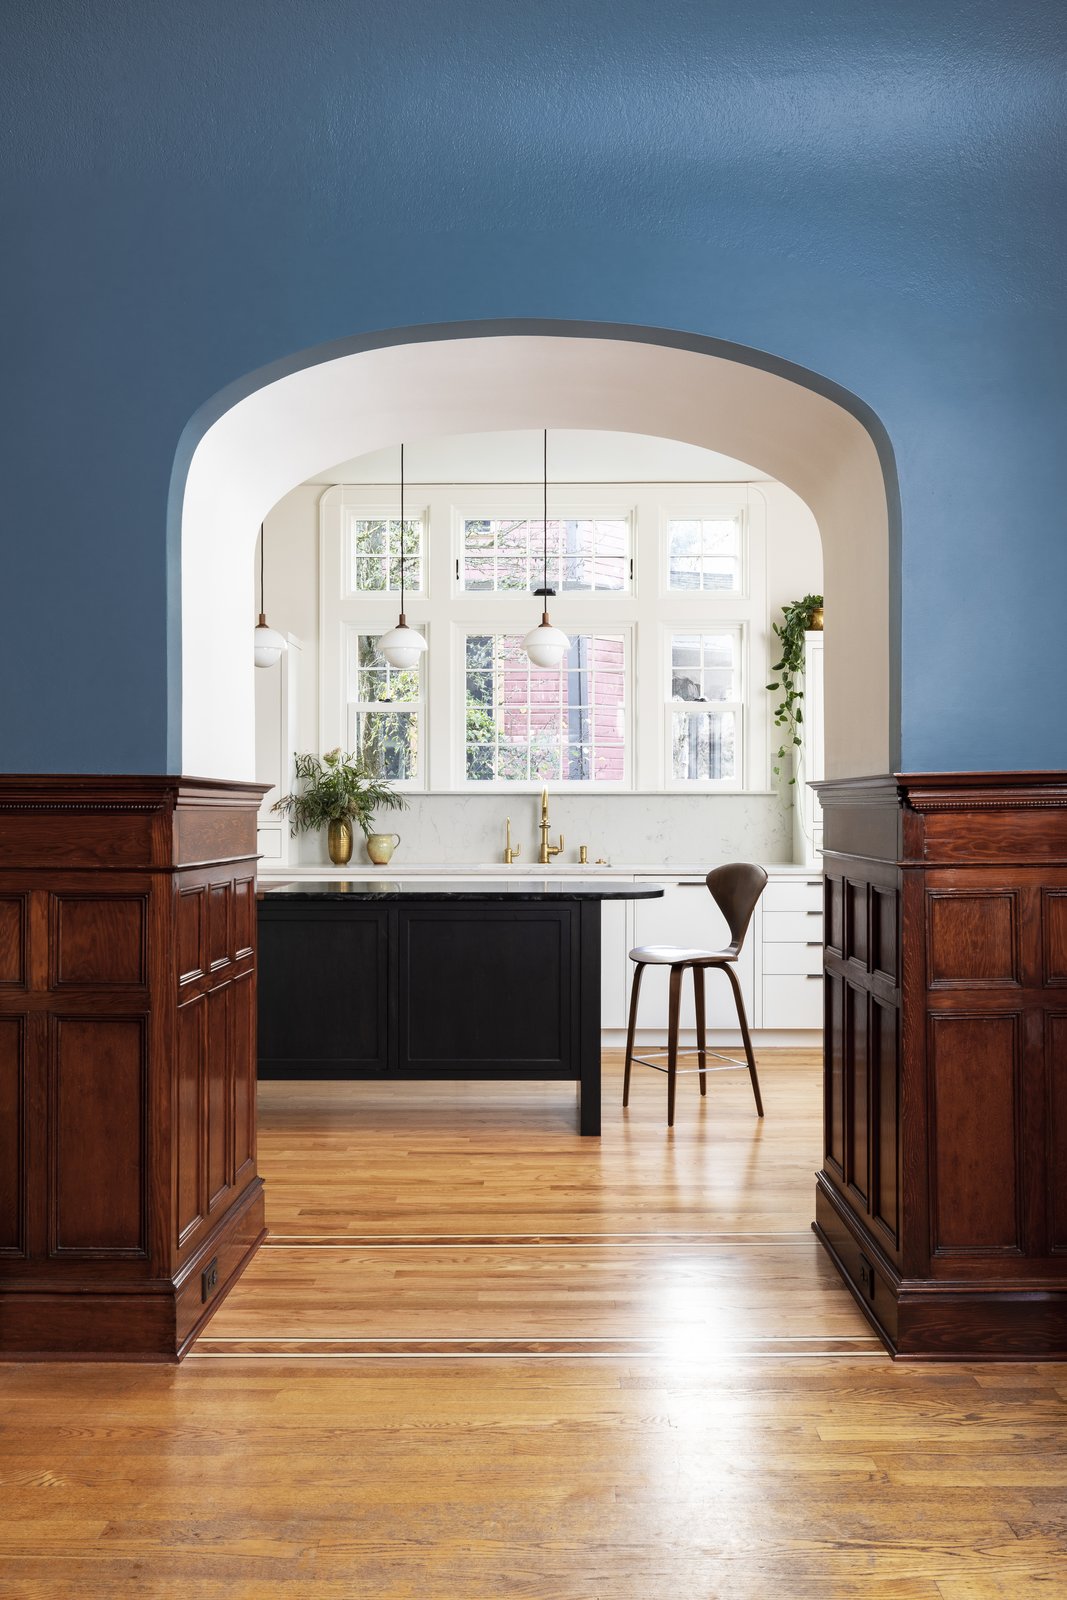 Dyer allocated the entry to the niche, saving and reinstalling the woodwork. It frames a beckoning view of the kitchen, as well as the striking new windows over the sink.